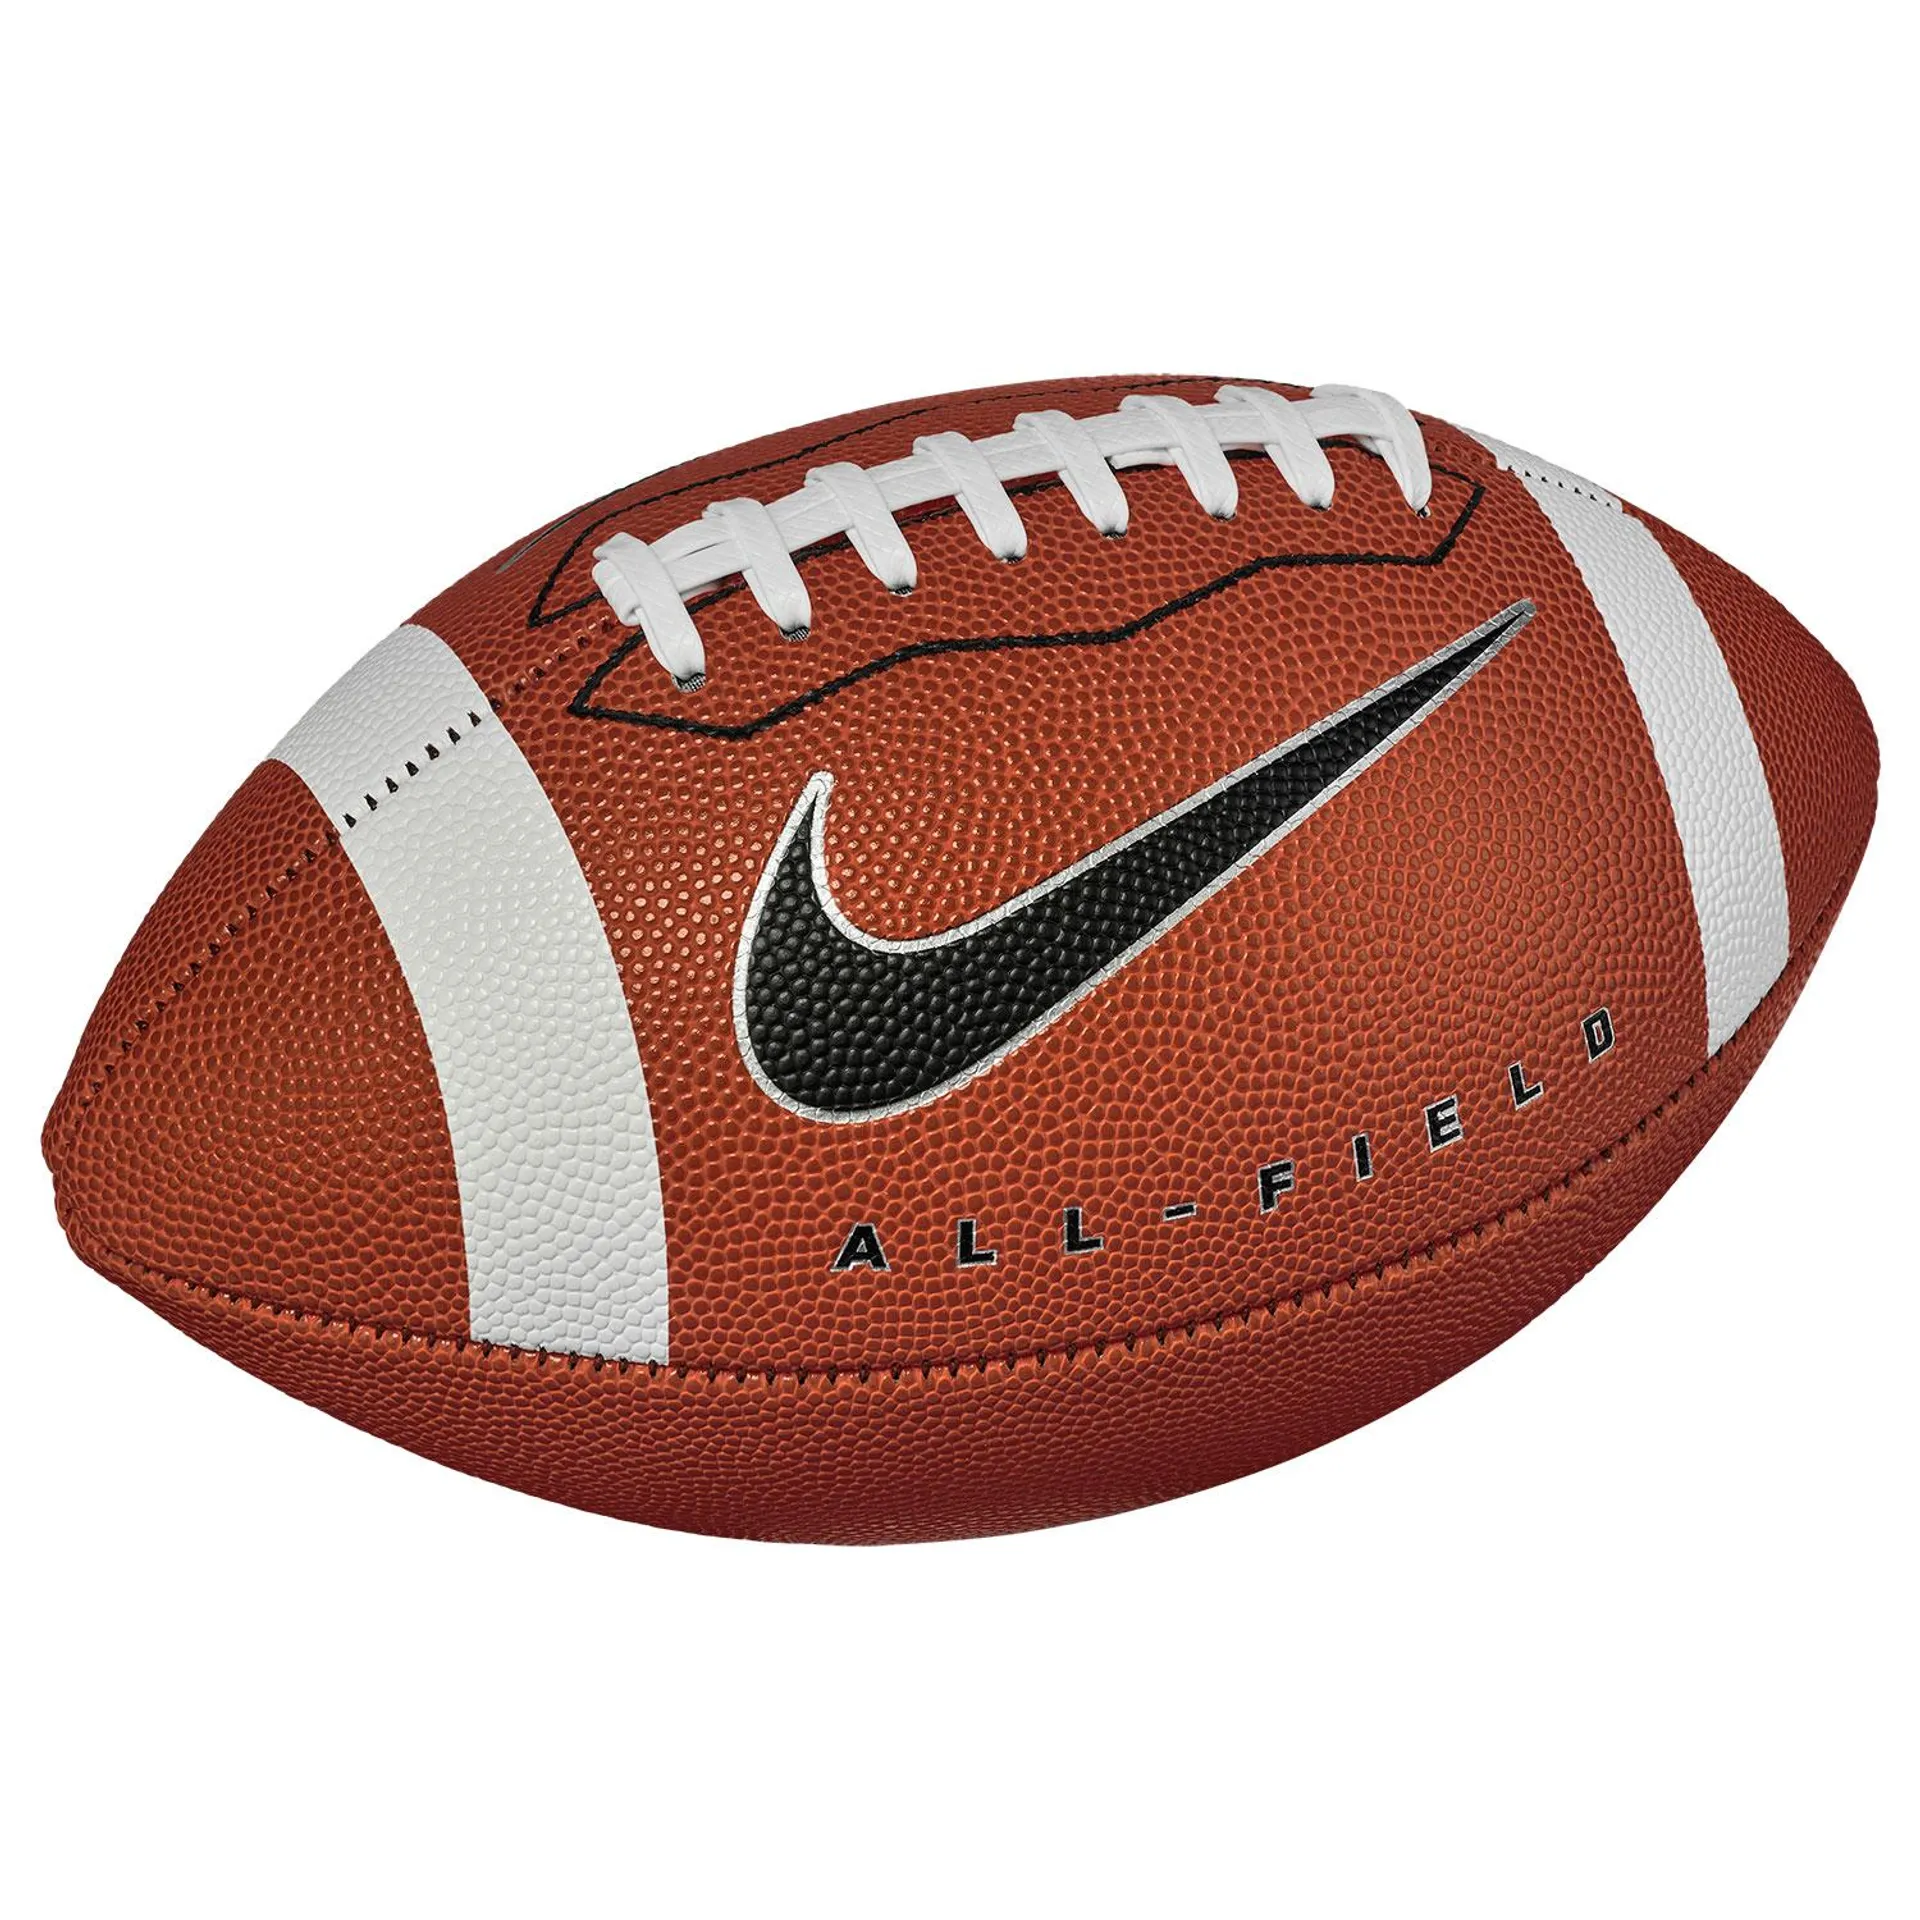 Nike All-Field 4.0 Official Size Football